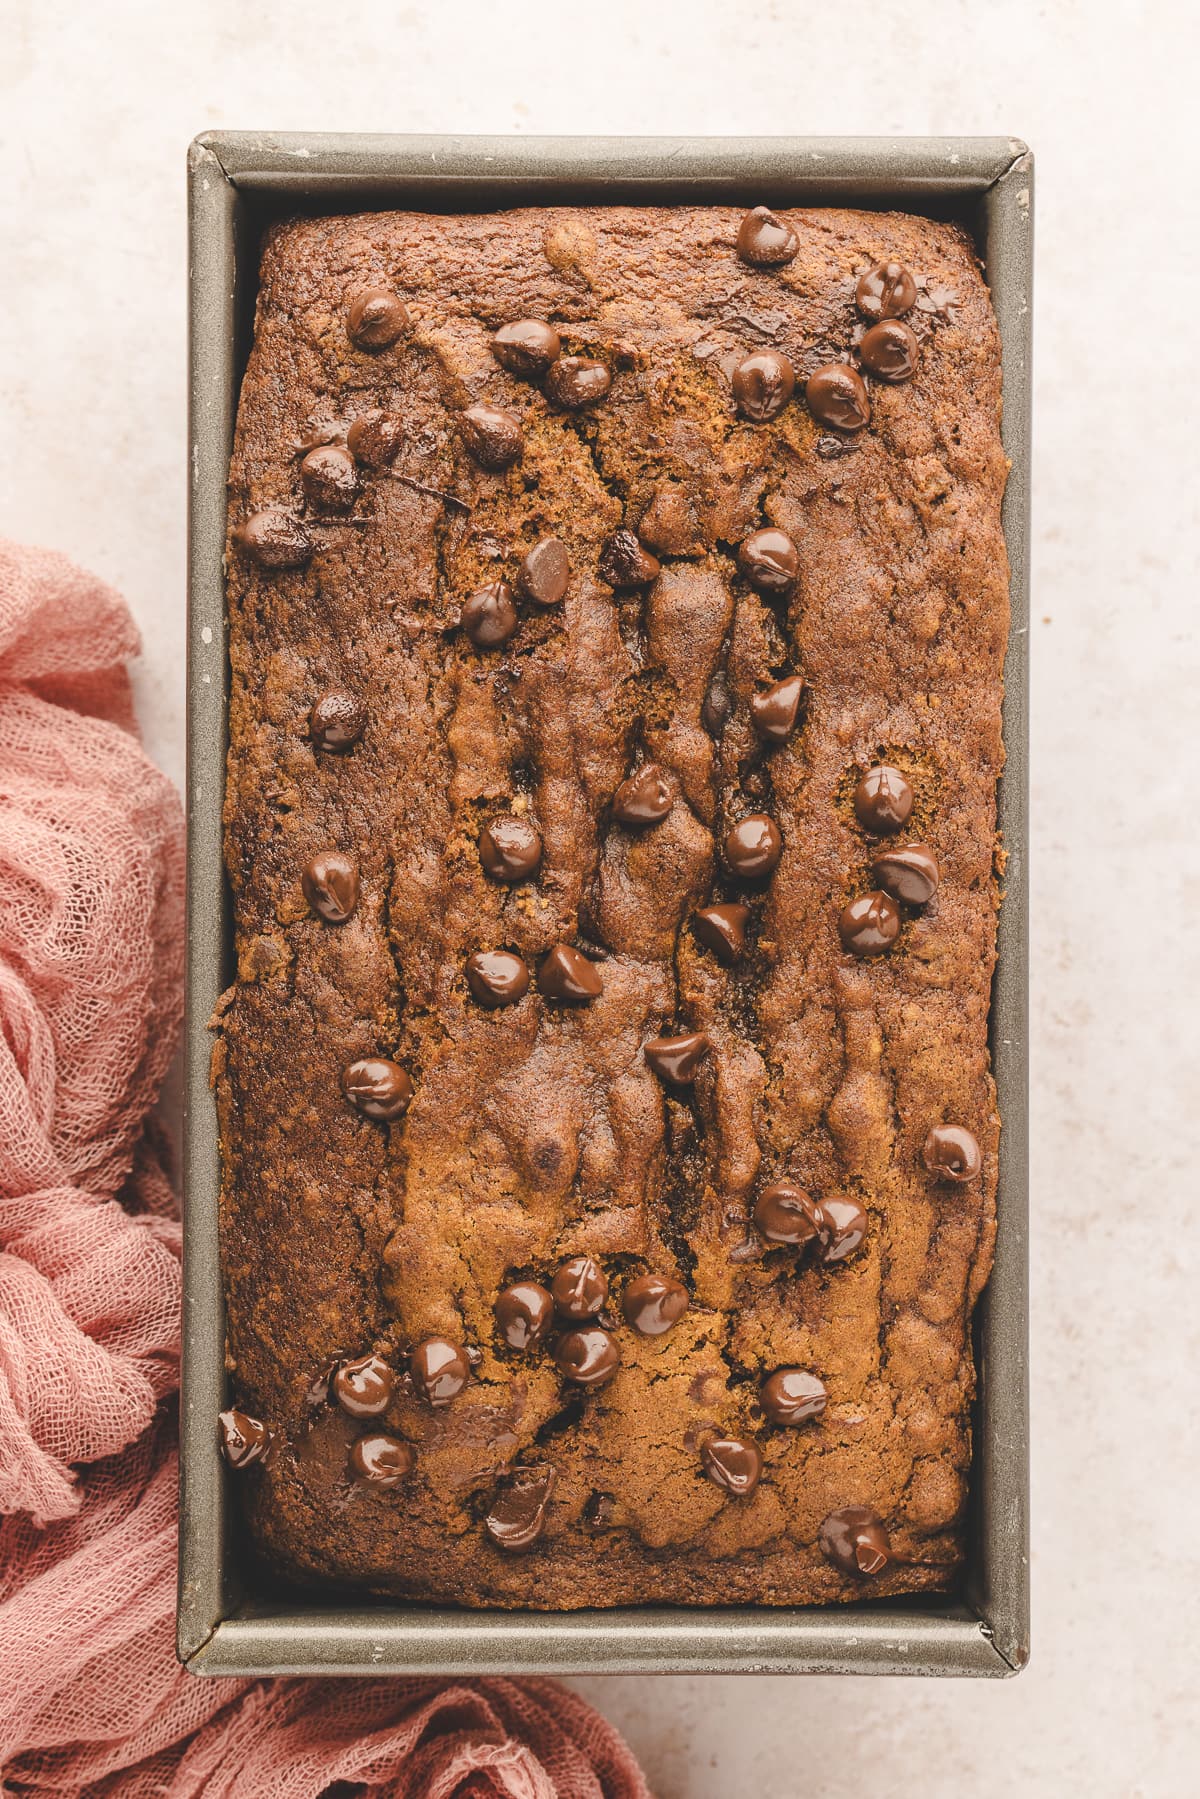 pumpkin chocolate chip bread baked in loaf pan